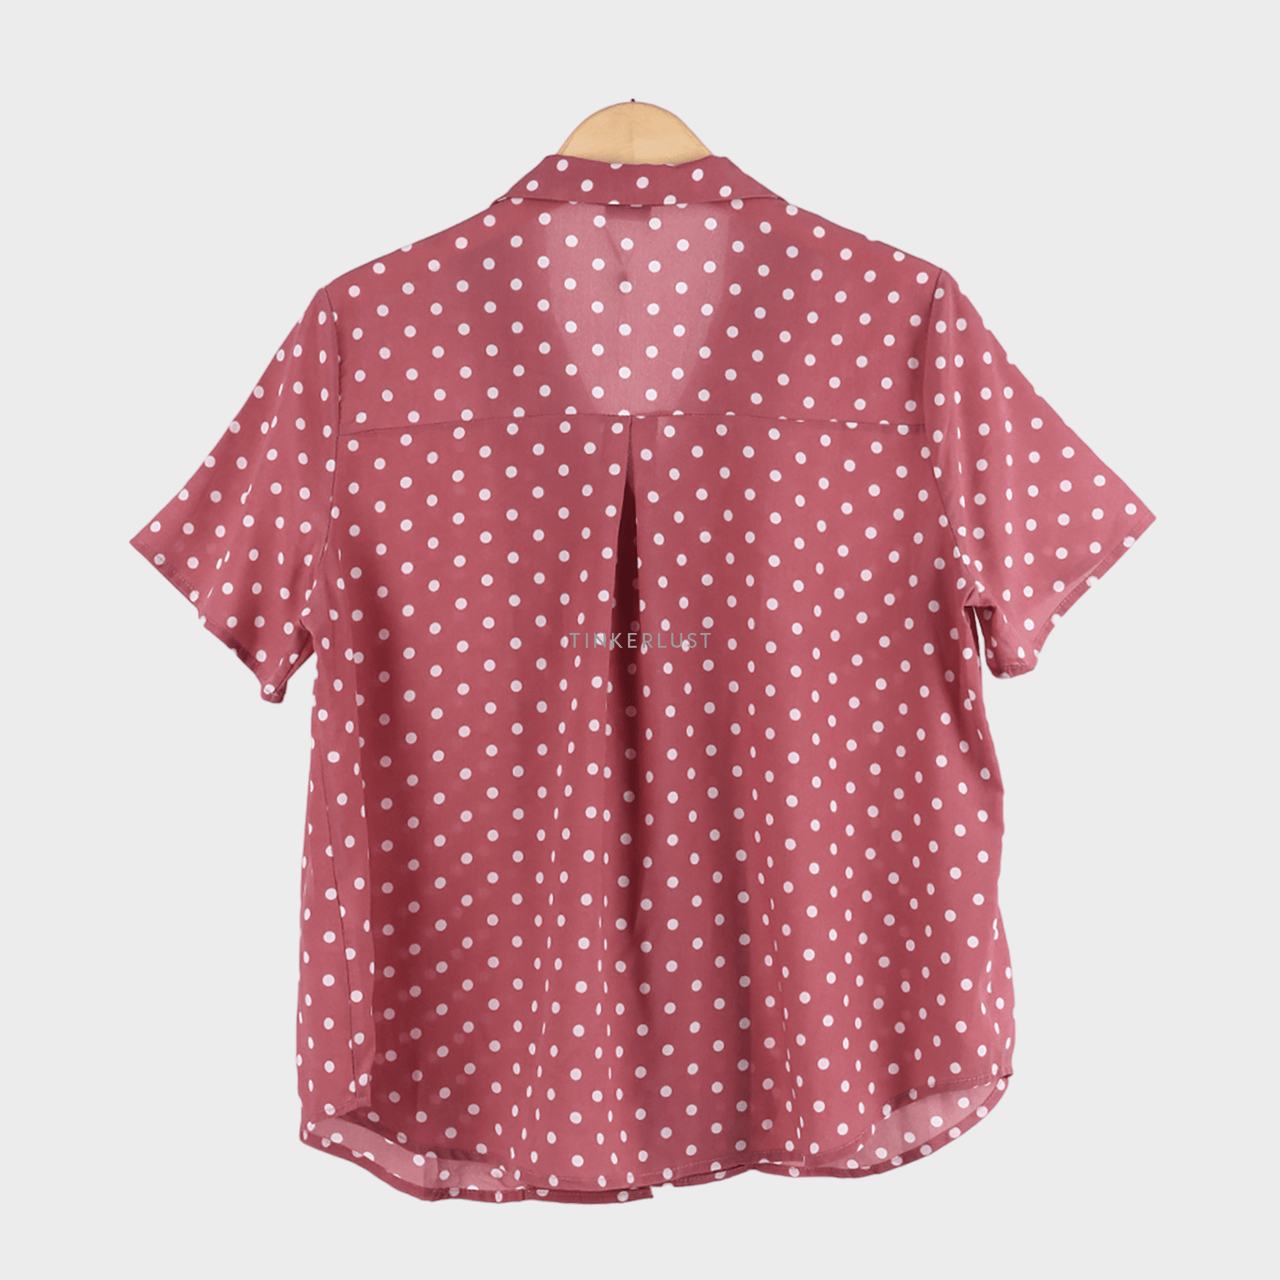 This is April Pink & White Polkadots Blouse